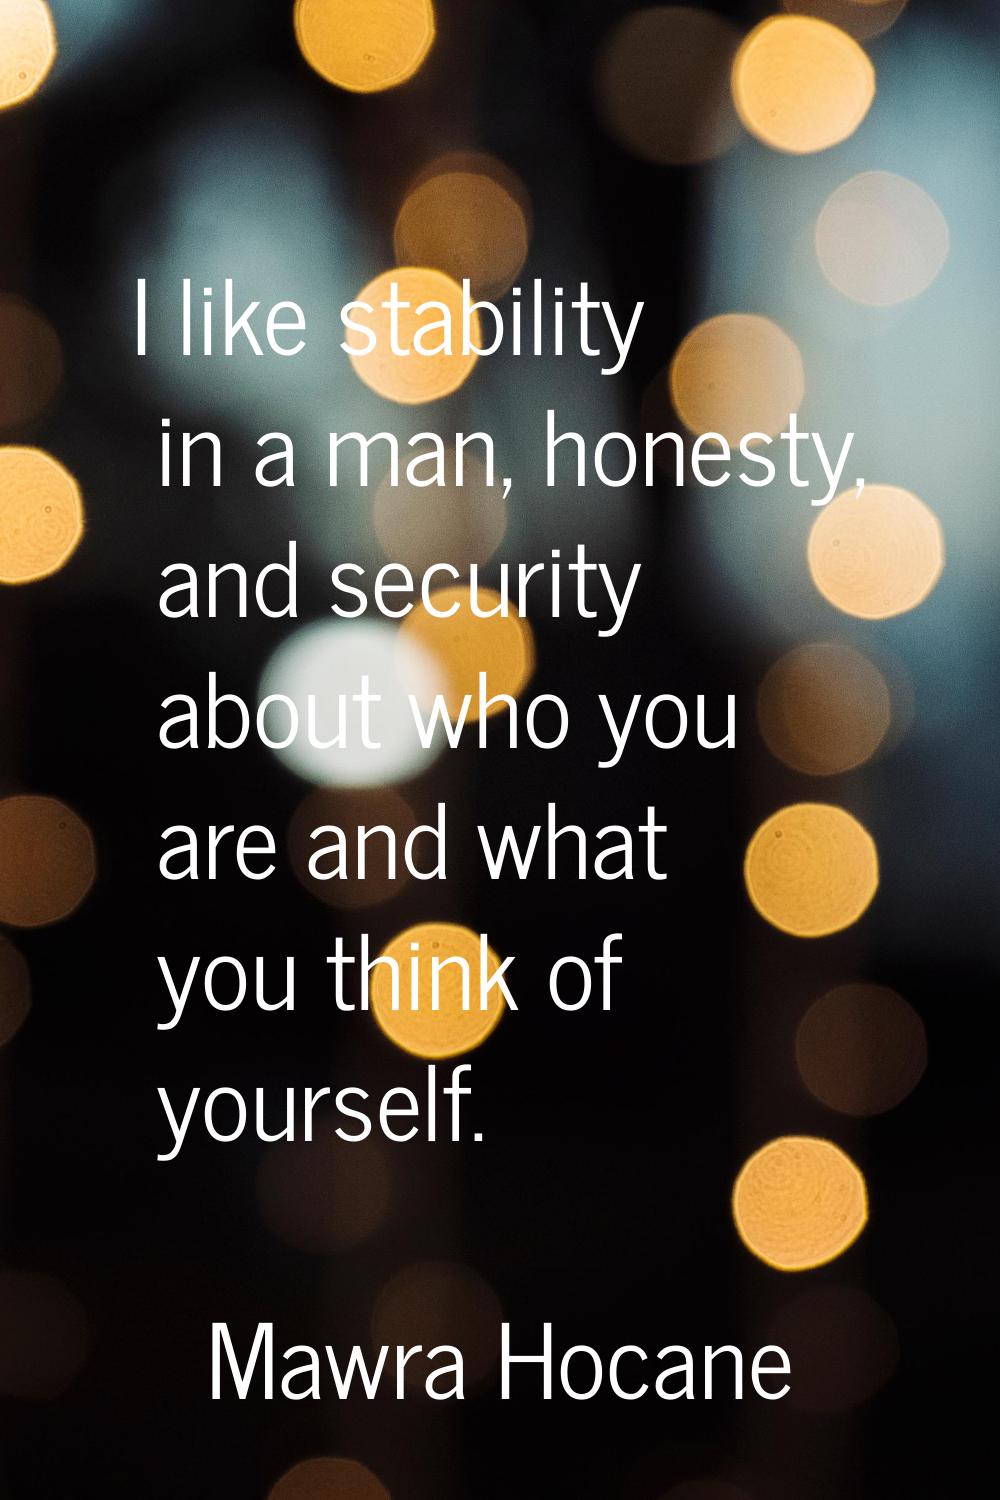 I like stability in a man, honesty, and security about who you are and what you think of yourself.